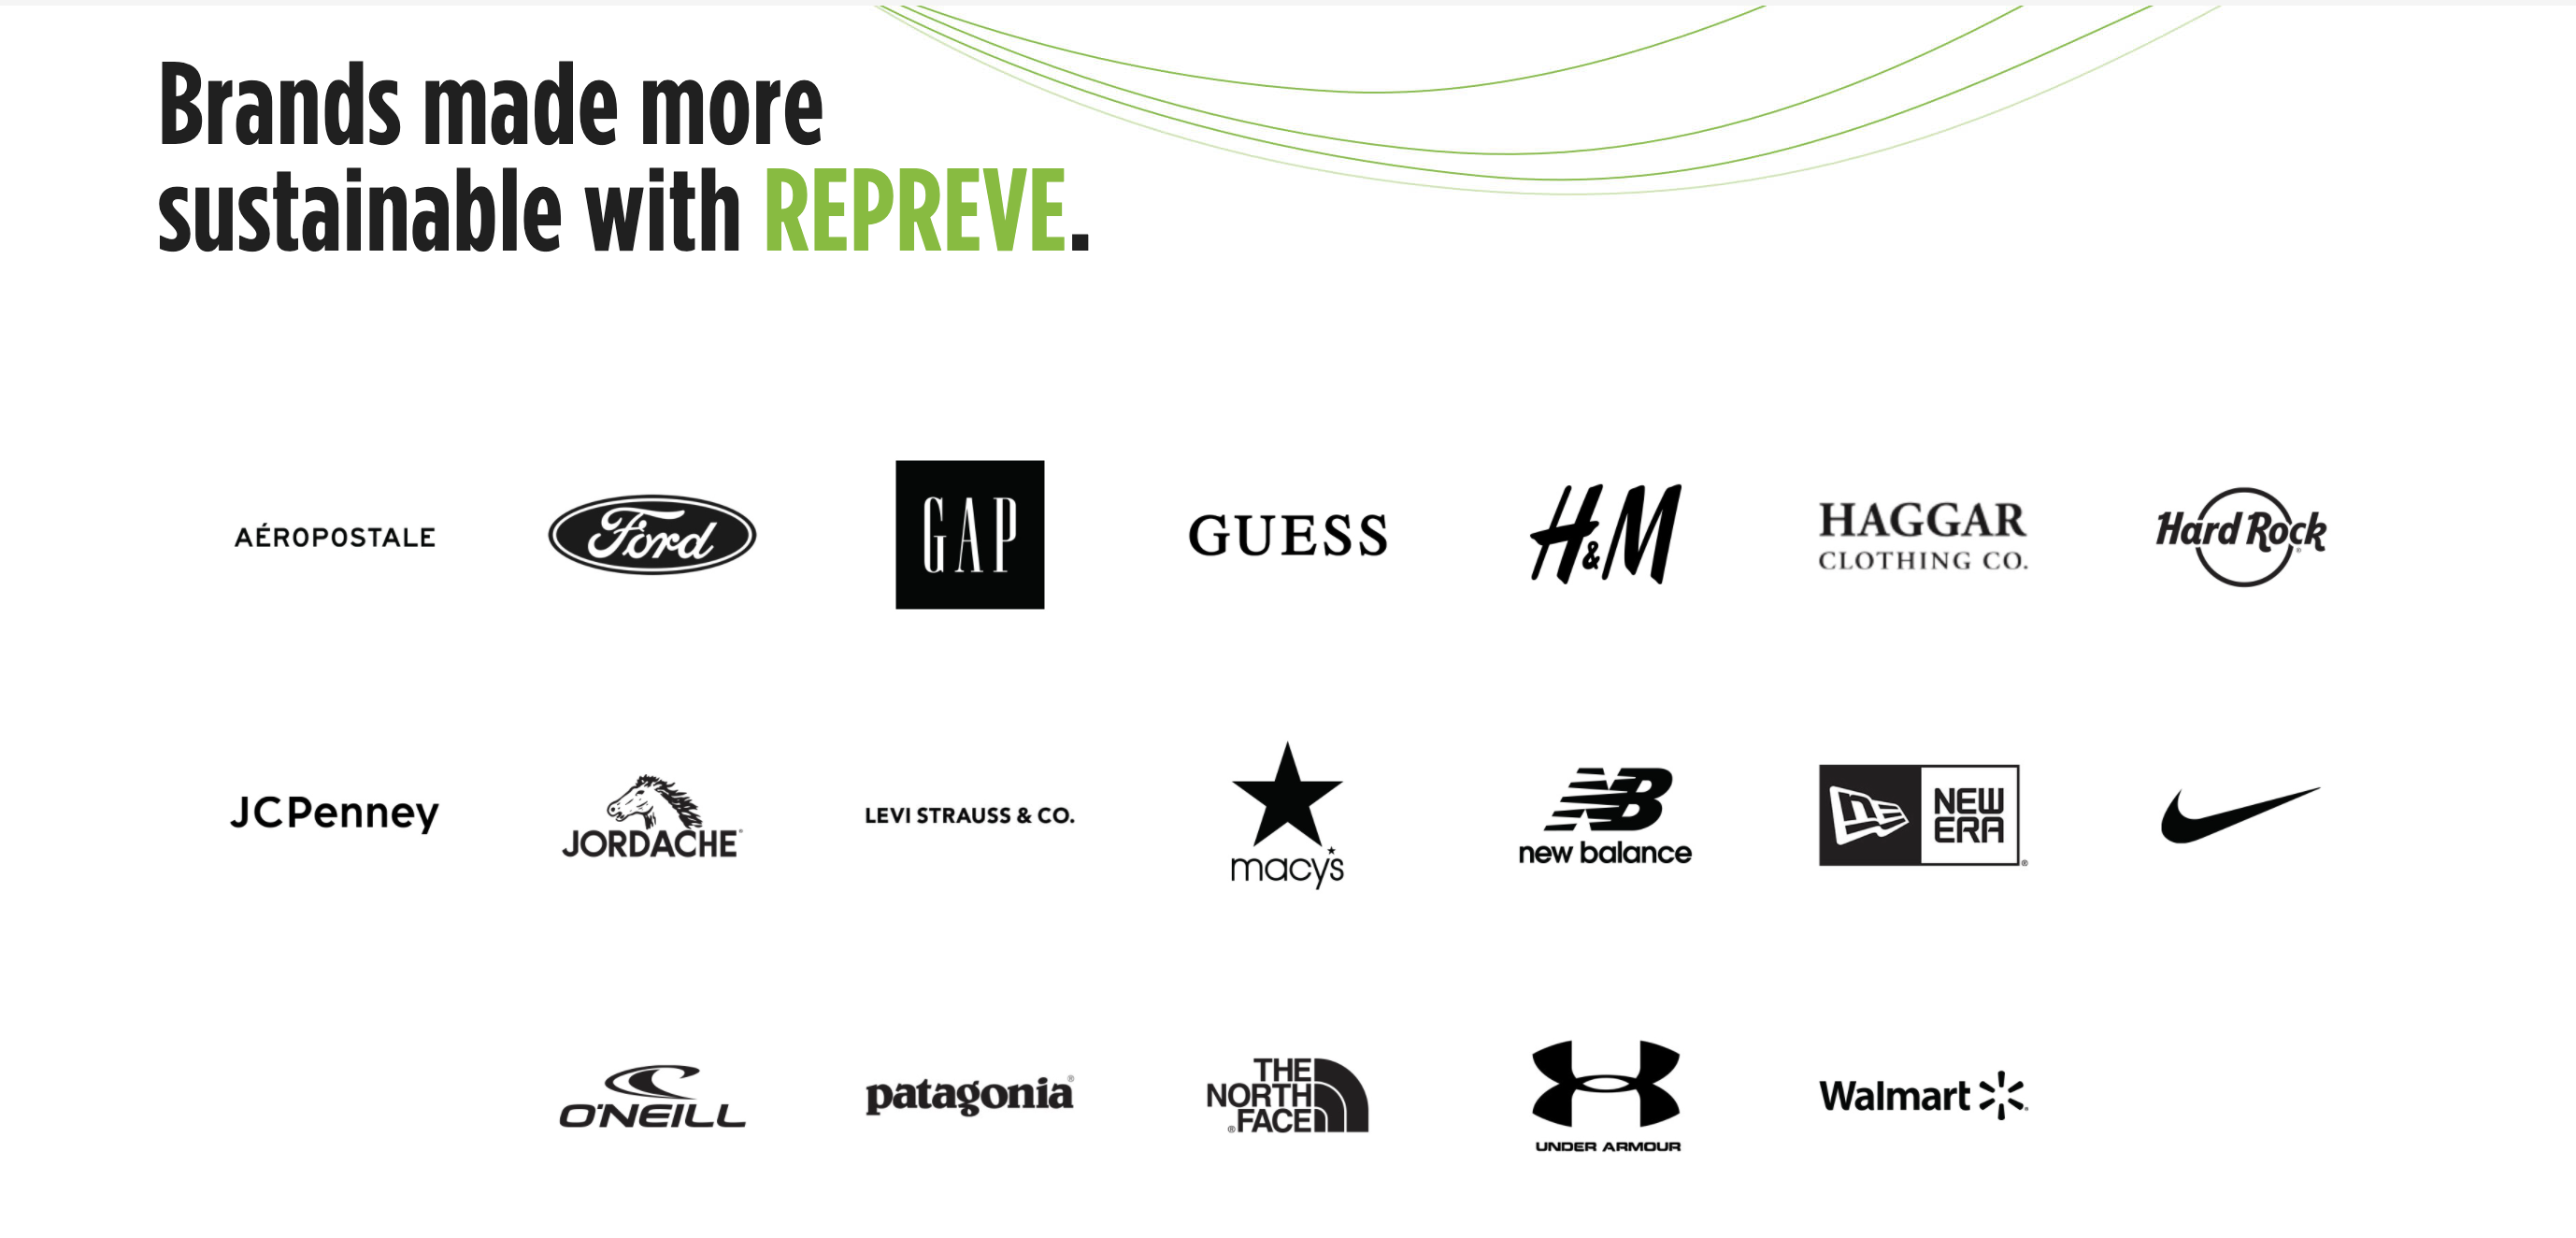 brands-walmart-under-armour-sustainable-repreve-collection-fabric-production